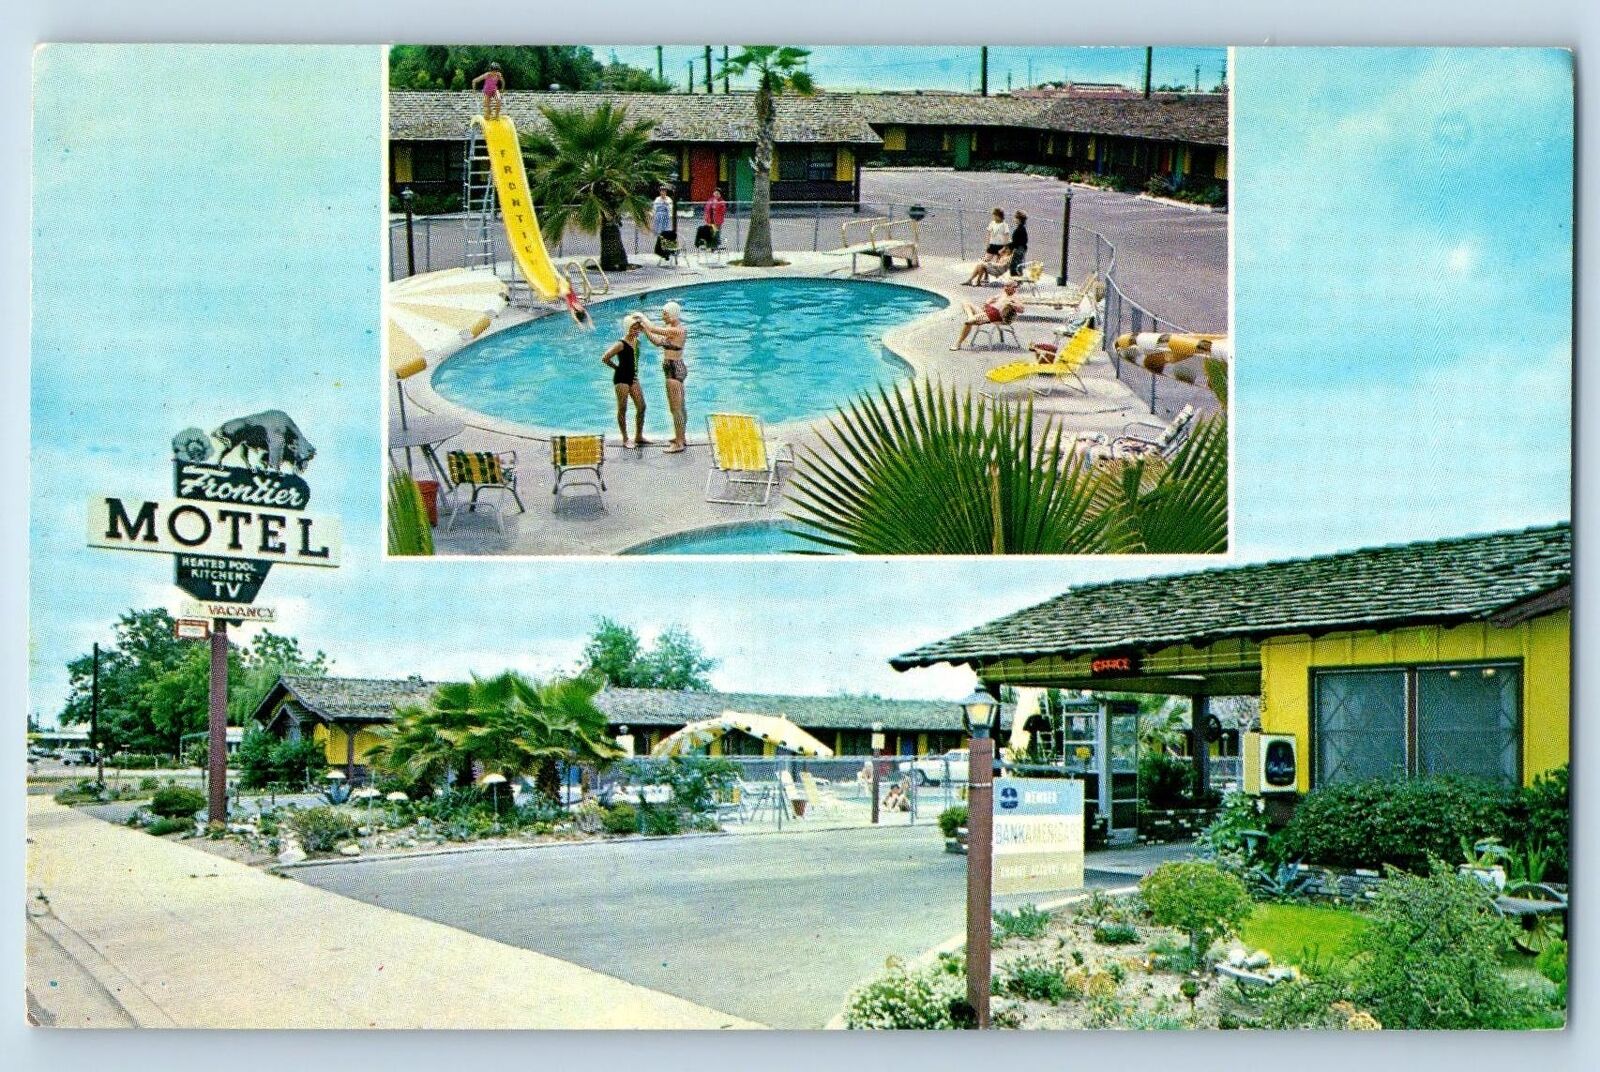 Anaheim California CA Postcard Frontier Motel Swimming Pool View c1960's Signage